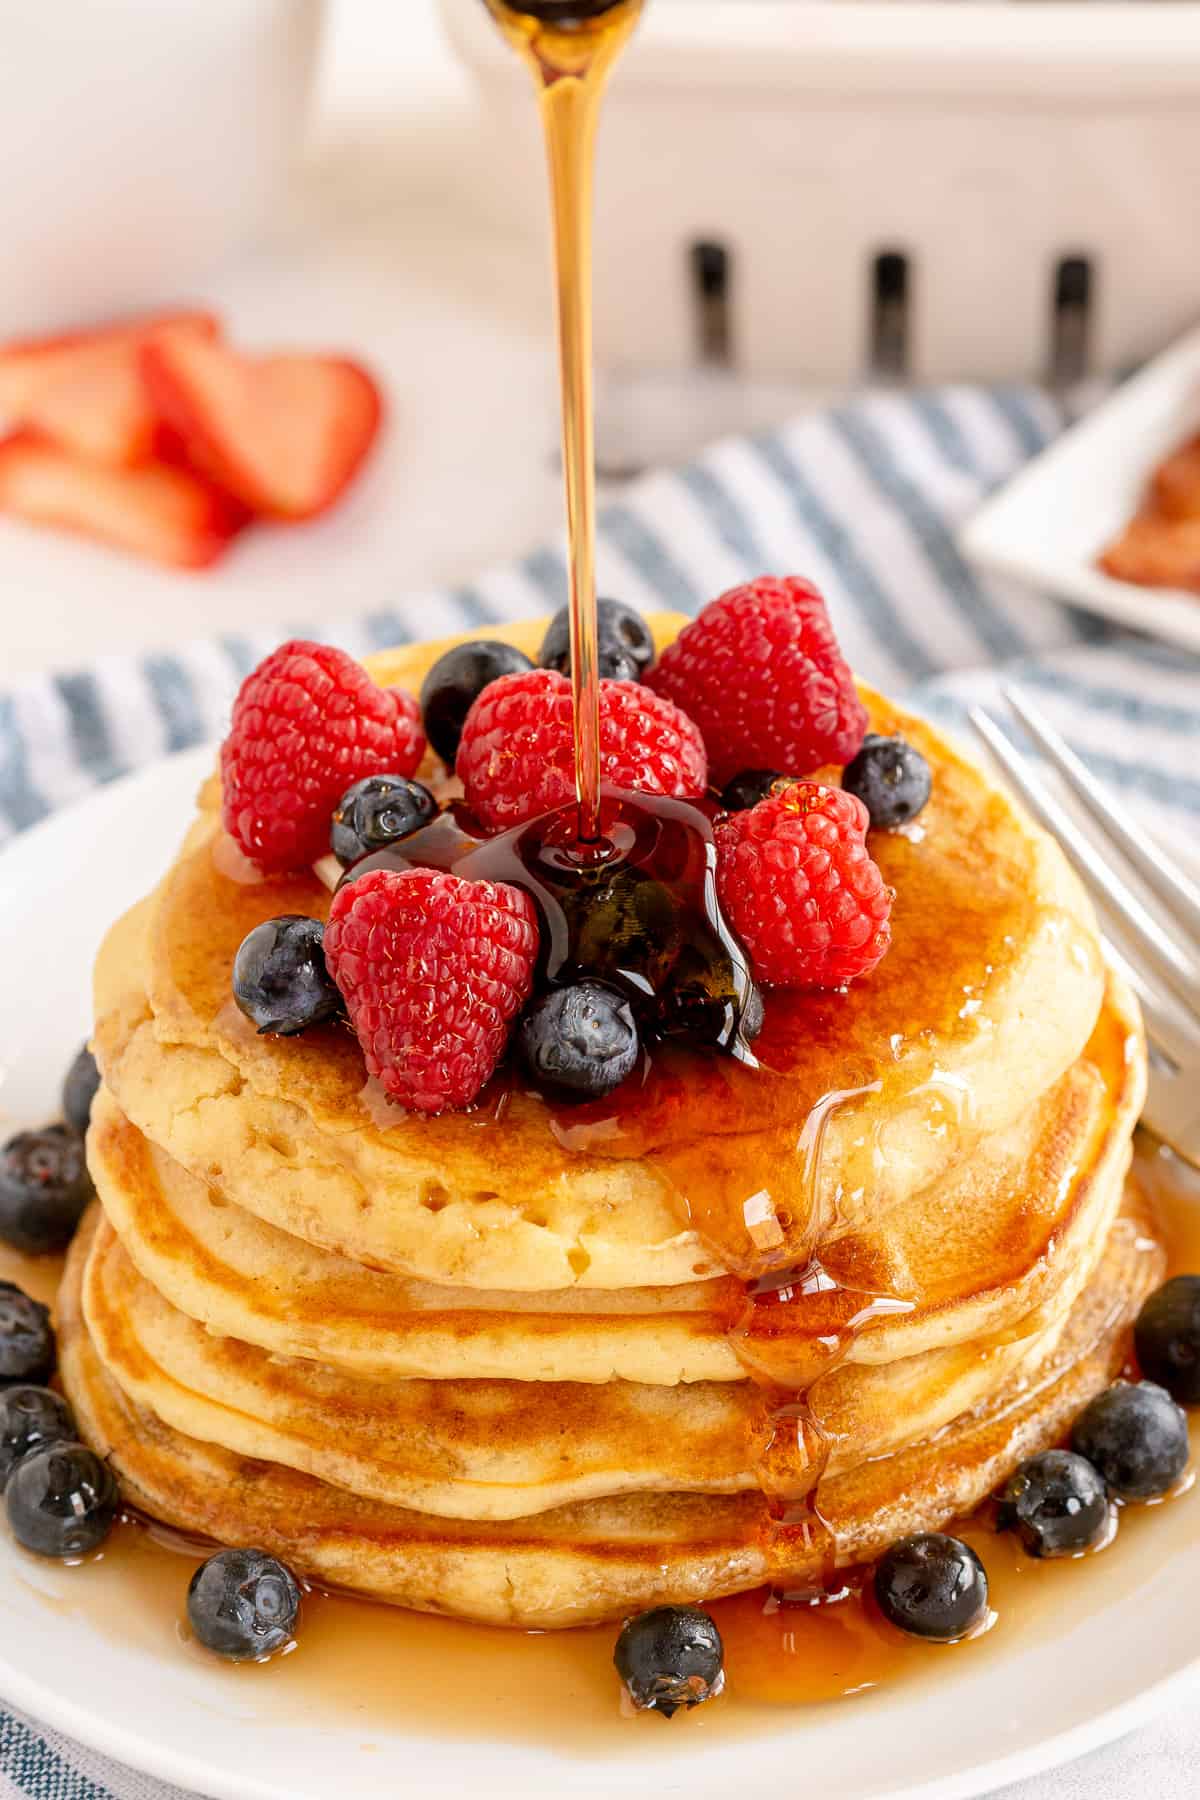 Maple syrup pouring over a stack of old fashioned pancakes topped with berries.